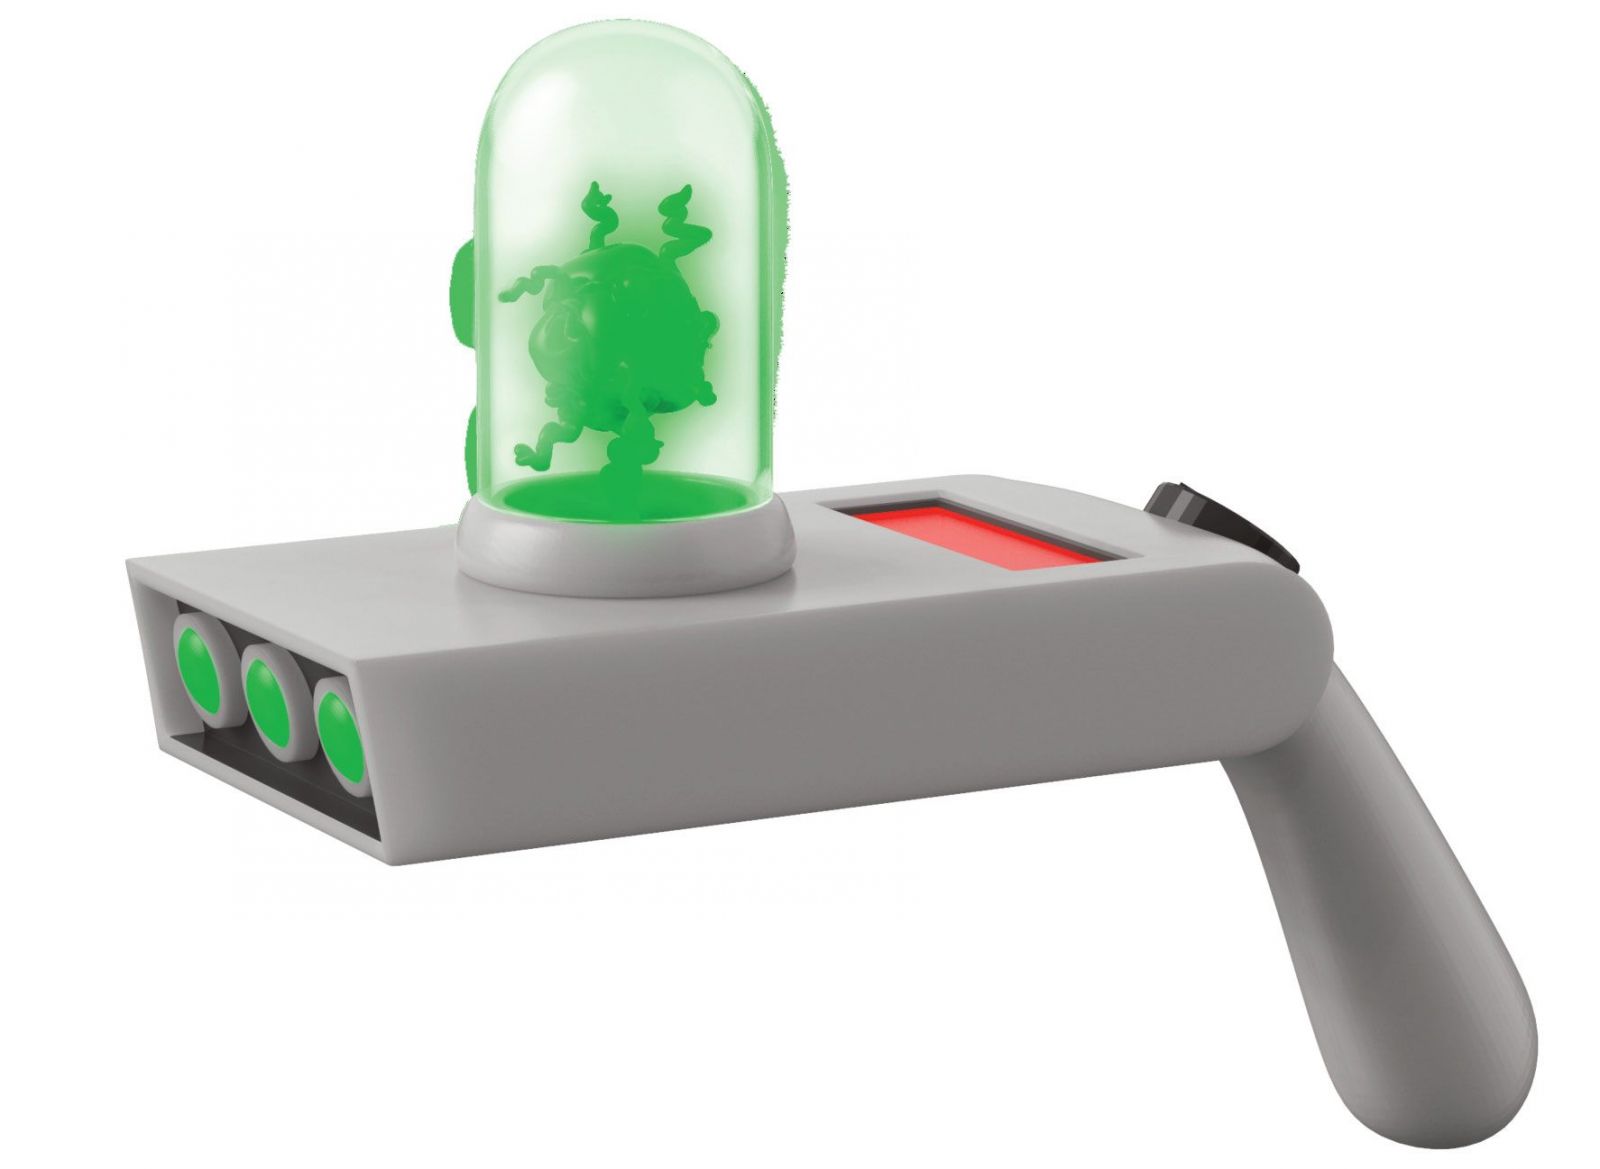 Rick and Morty Vinyl Toy Sound and Light Up Portal Gun Funko